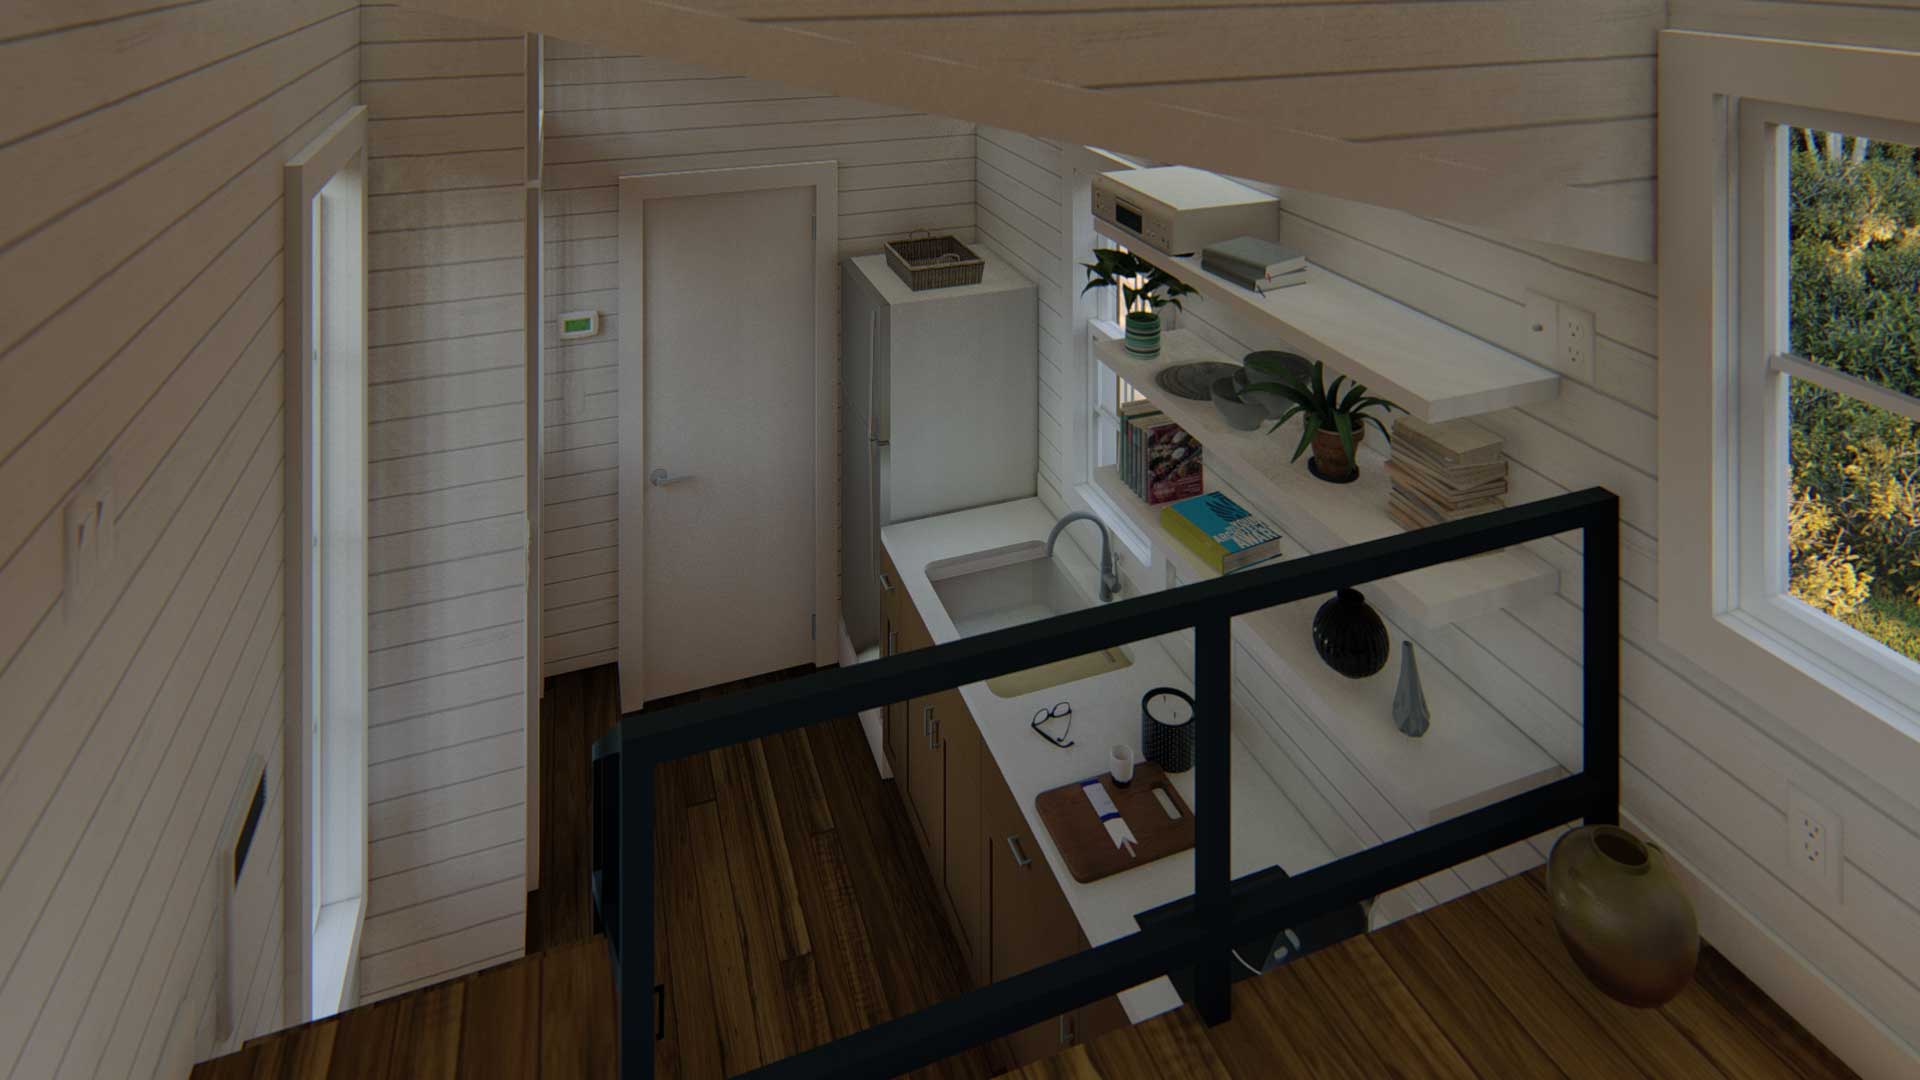 The Live/Work Tiny Home by Tiny Heirloom - Tiny Living Central